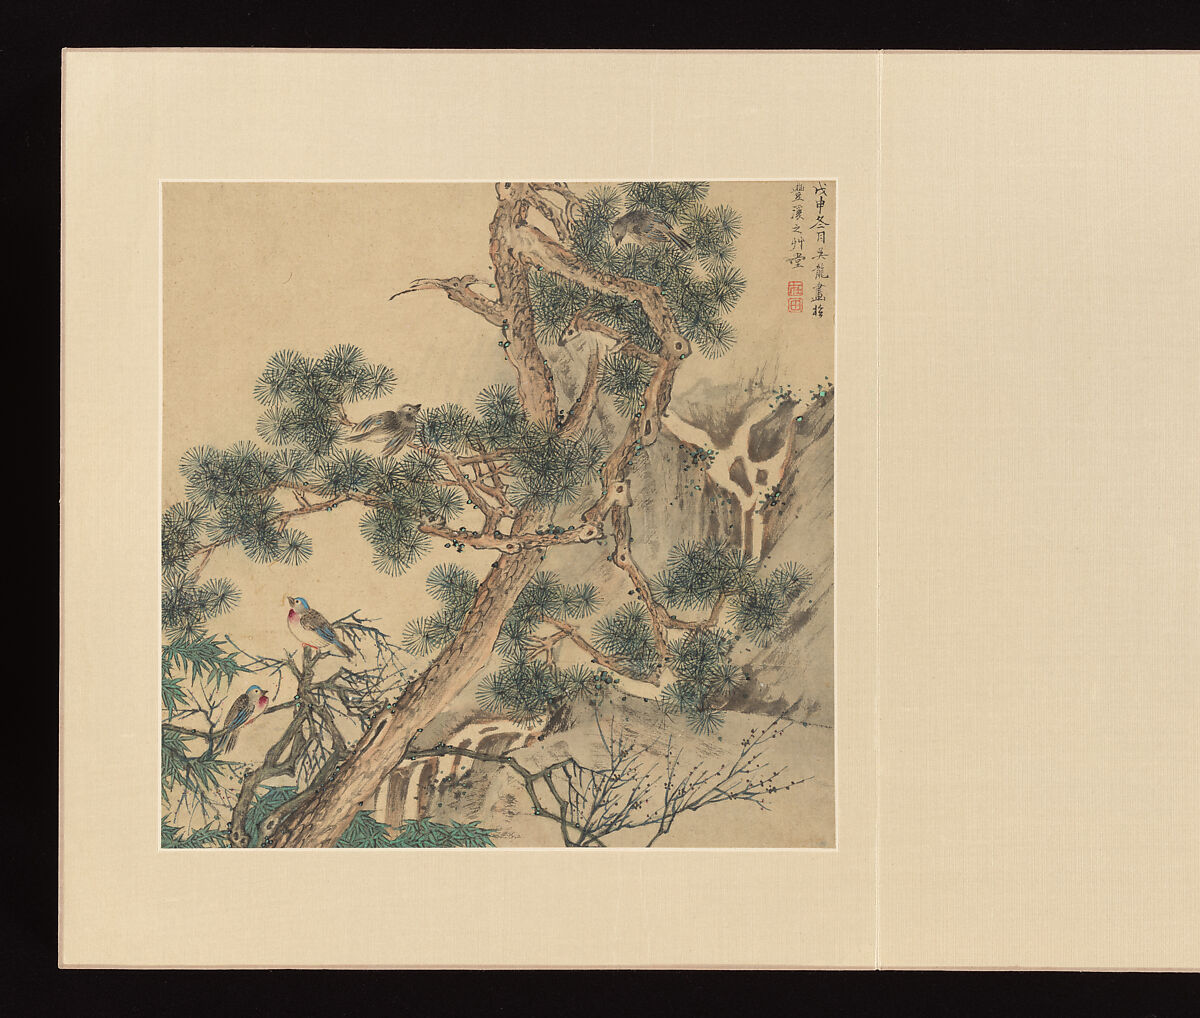 Paintings after old masters, Wu Long (Chinese, active late 17th–early 18th century), Album of fourteen leaves; ink and color on paper, China 